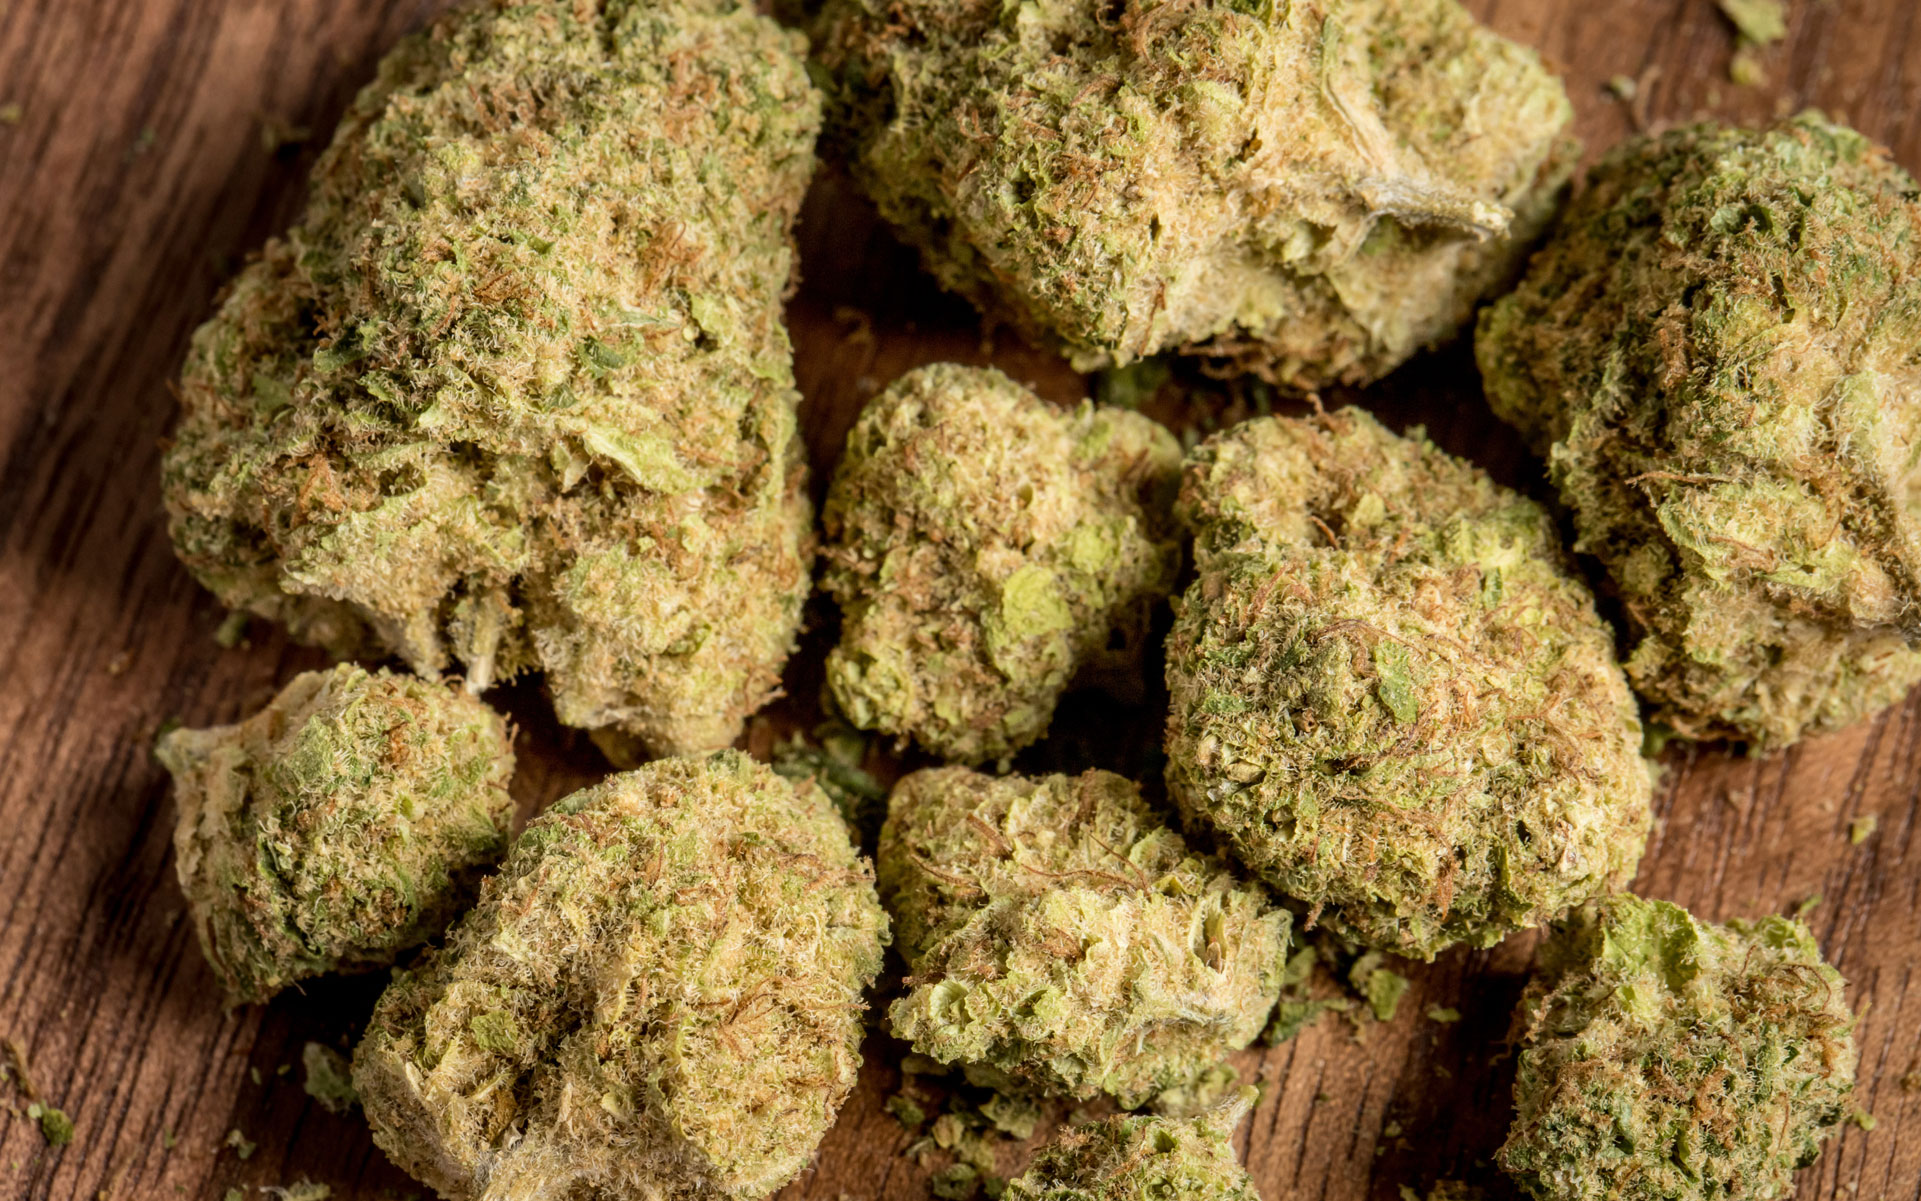 What to do with disappointing weed